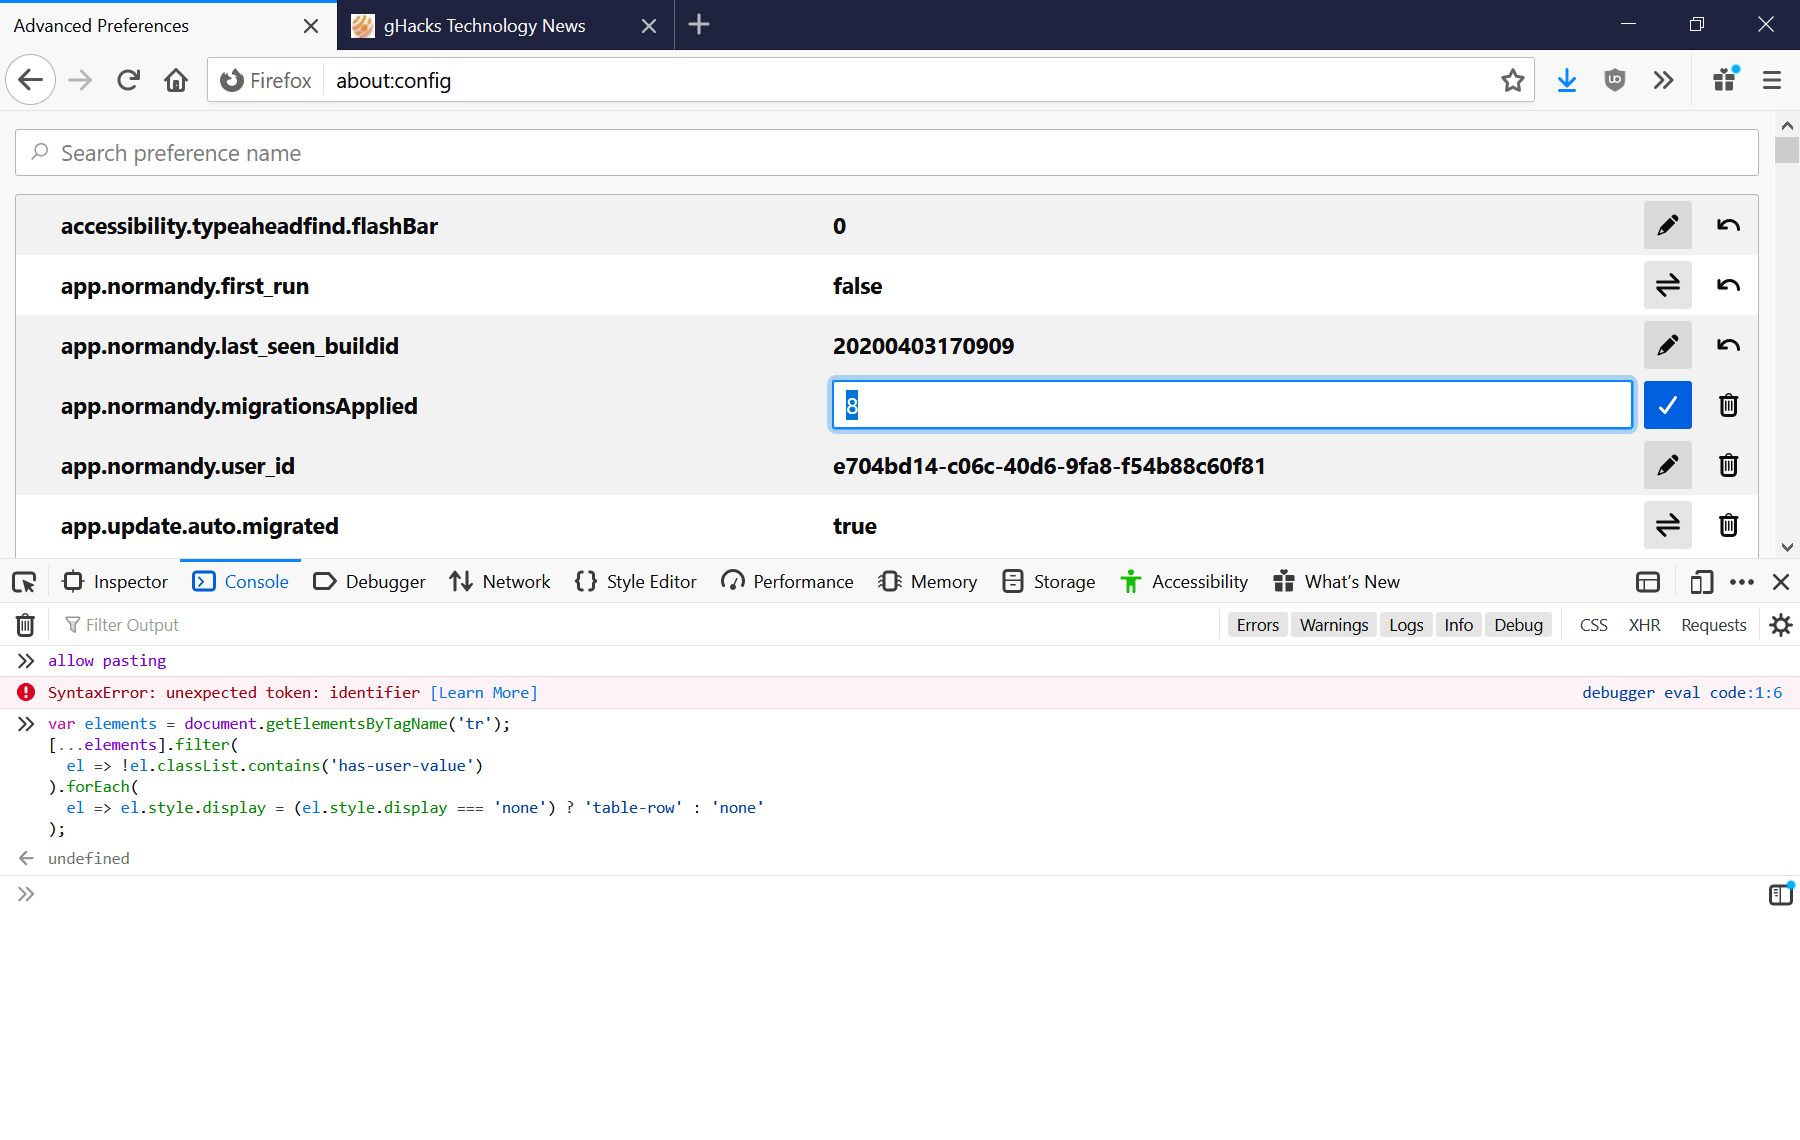 How to display only modified preferences on about:config in Firefox